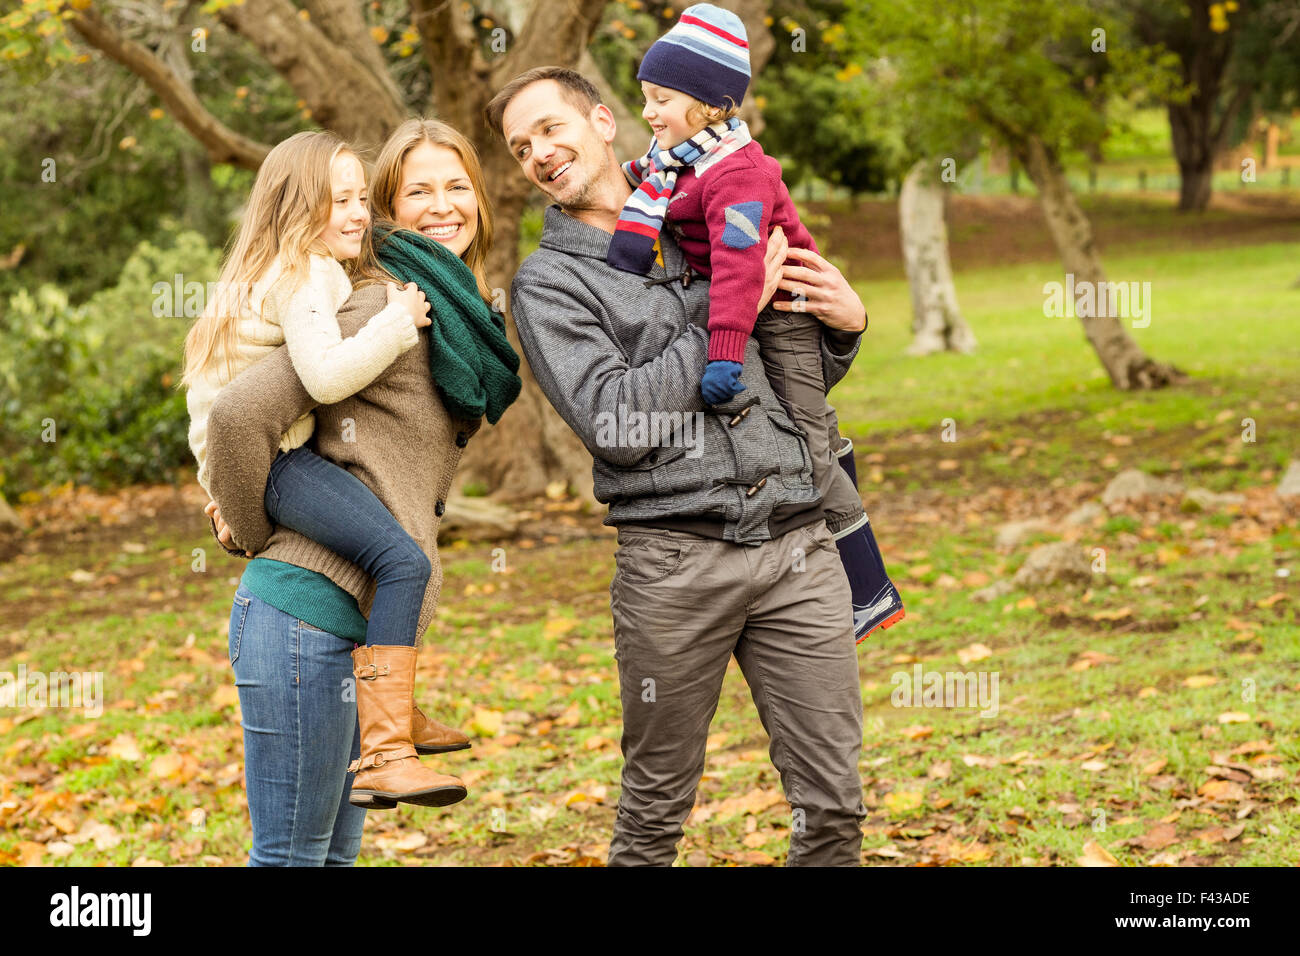 Smiling young family looking each other Stock Photo